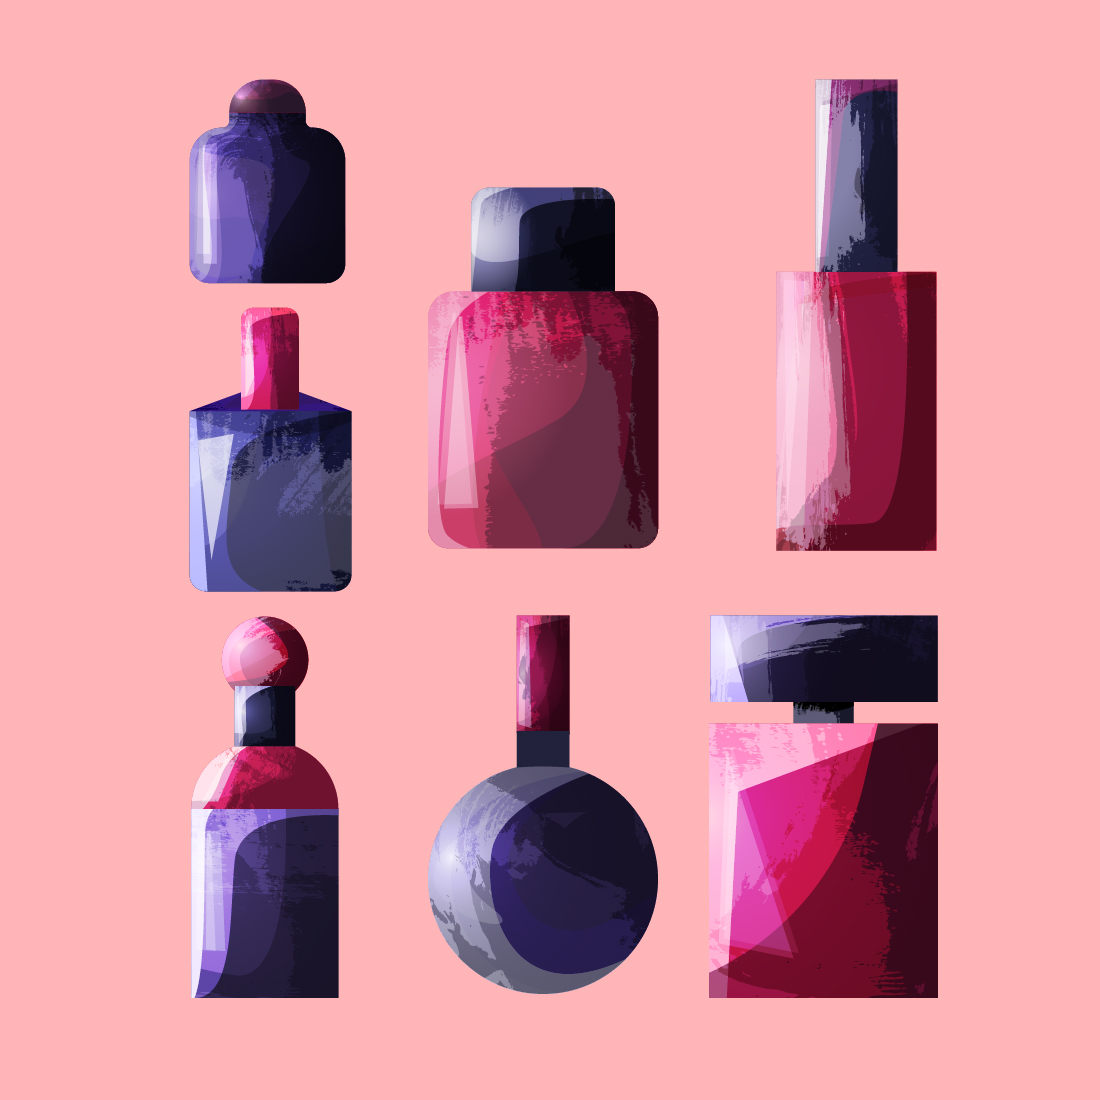 Perfume Packaging Illustrations cover image.